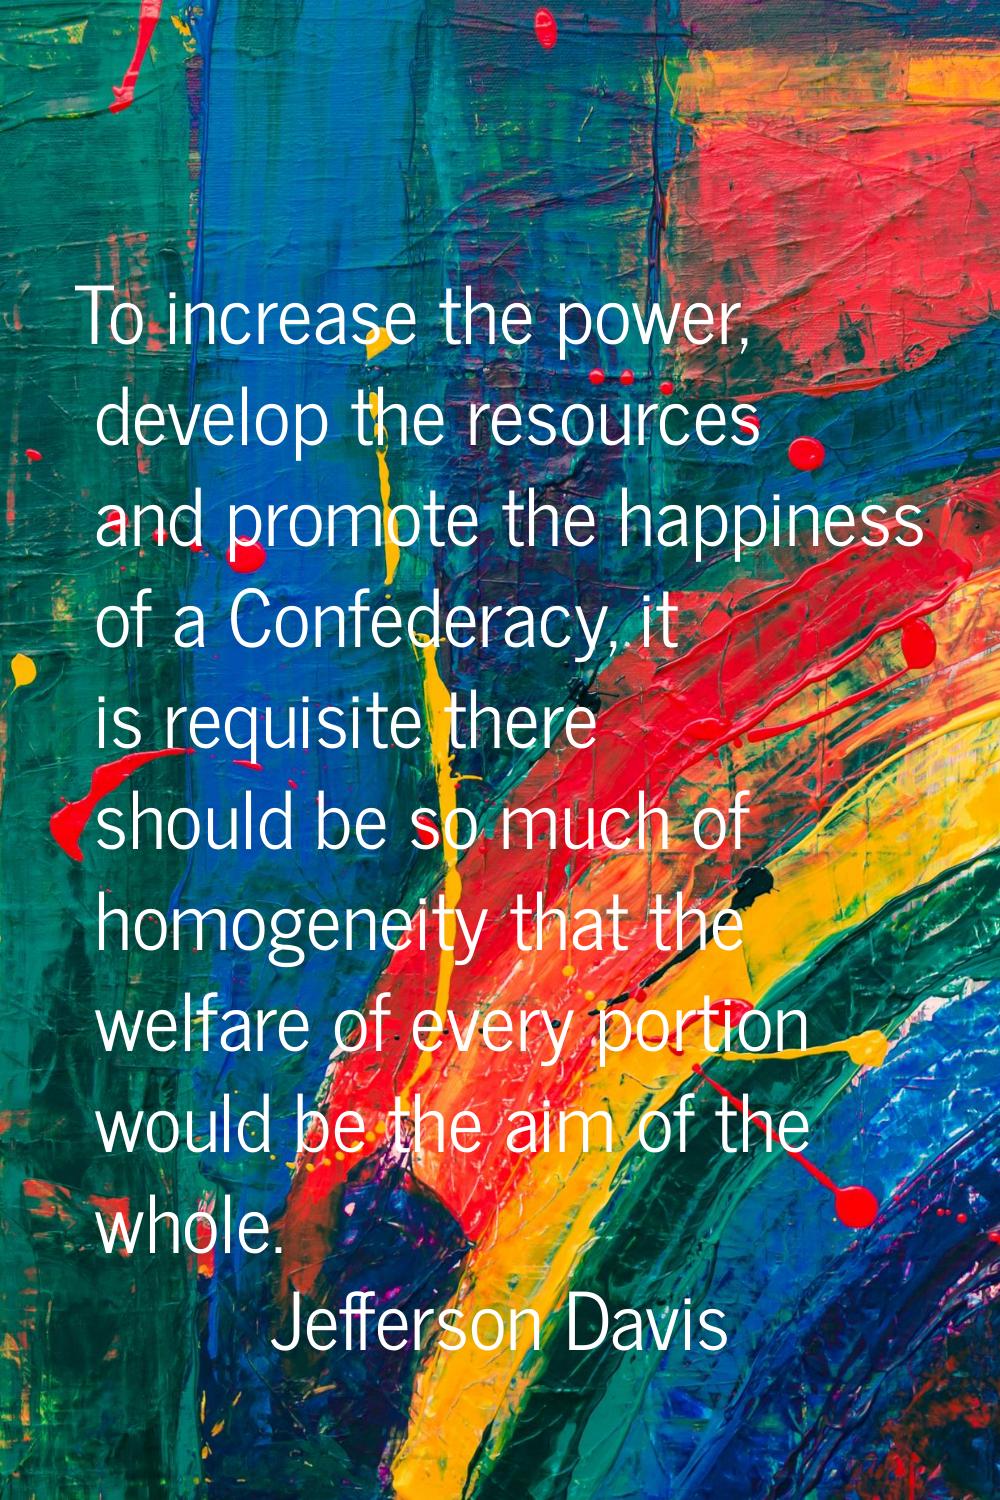 To increase the power, develop the resources and promote the happiness of a Confederacy, it is requ